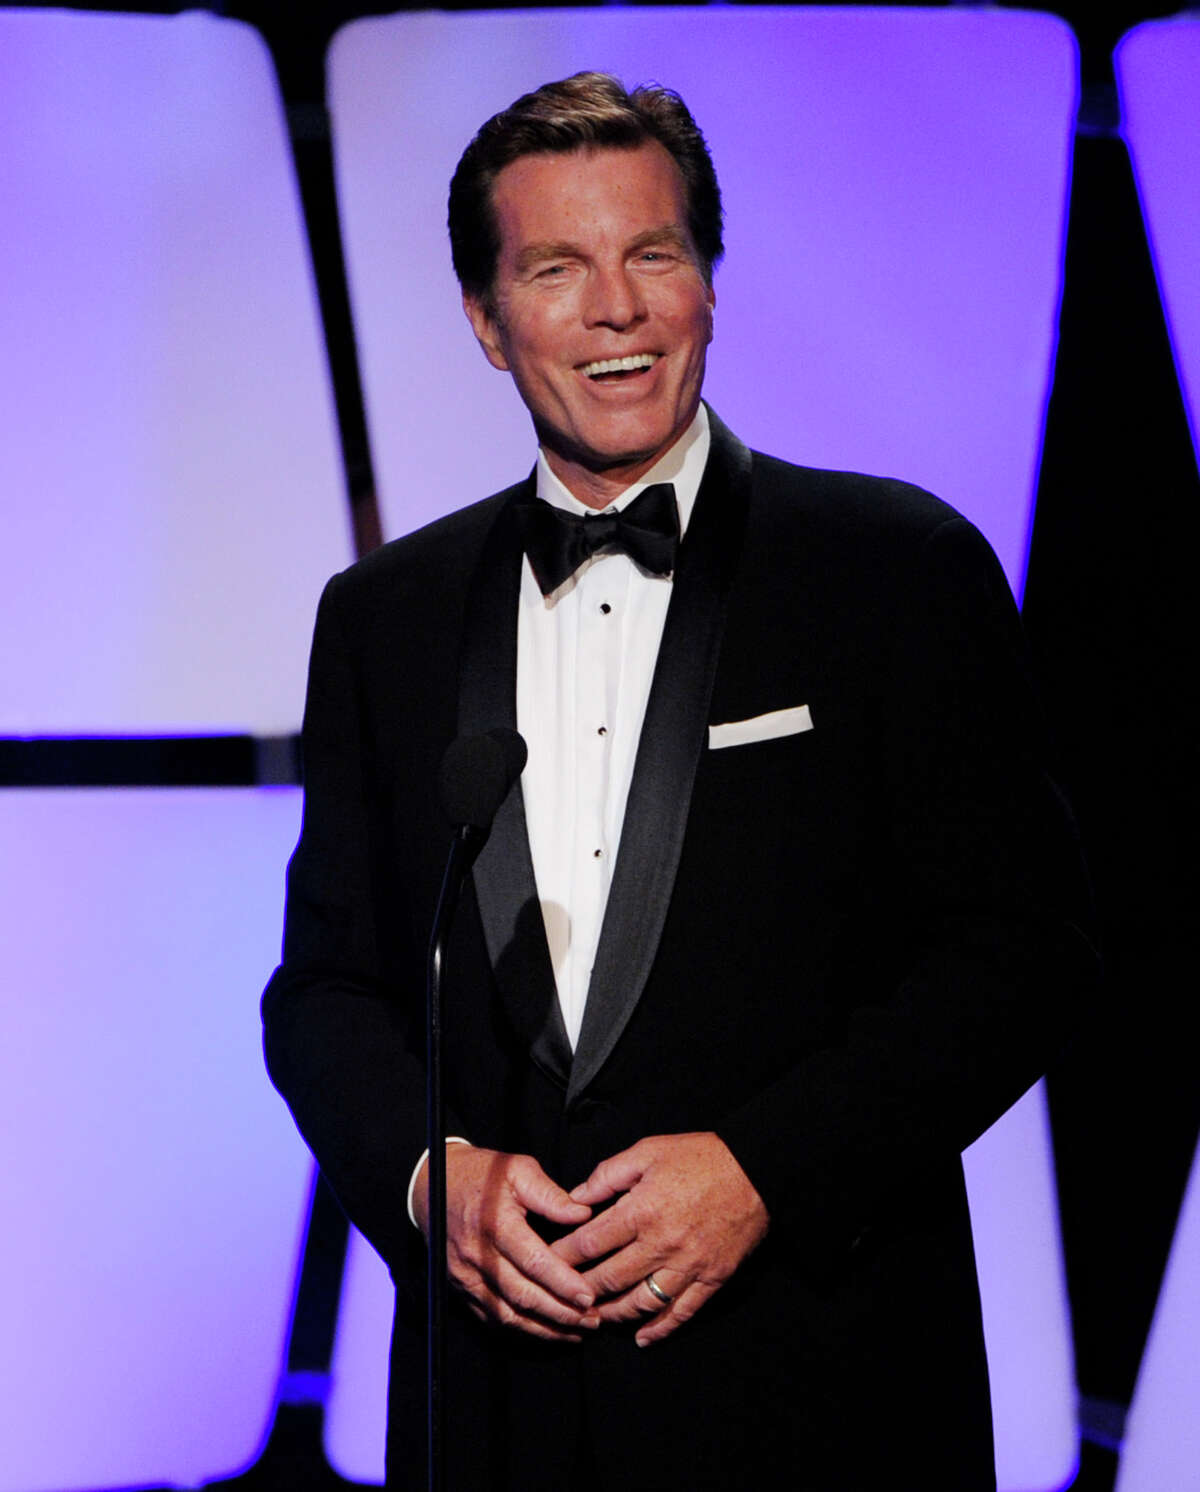 BEVERLY HILLS, CA - JUNE 23: Actor Peter Bergman appears onstage at the 39th Annual Daytime Entertainment Emmy Awards at the Beverly Hilton Hotel on June 23, 2012 in Beverly Hills, California. (Photo by Kevin Winter/Getty Images)